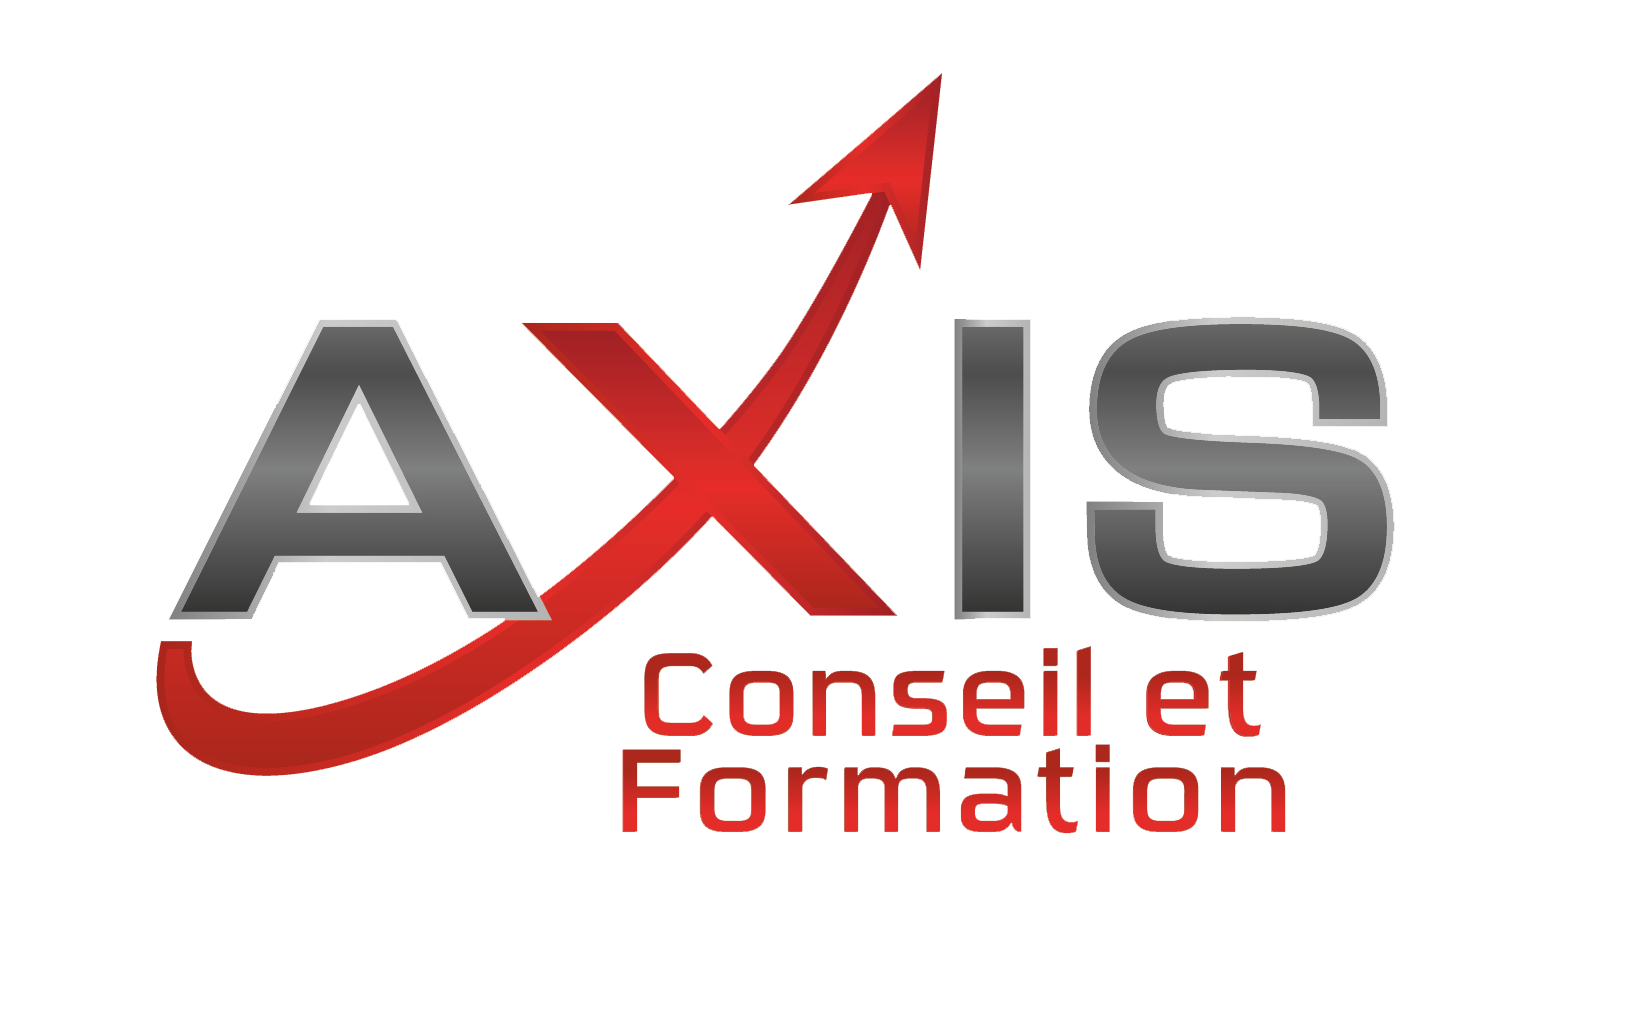 Axis Formation